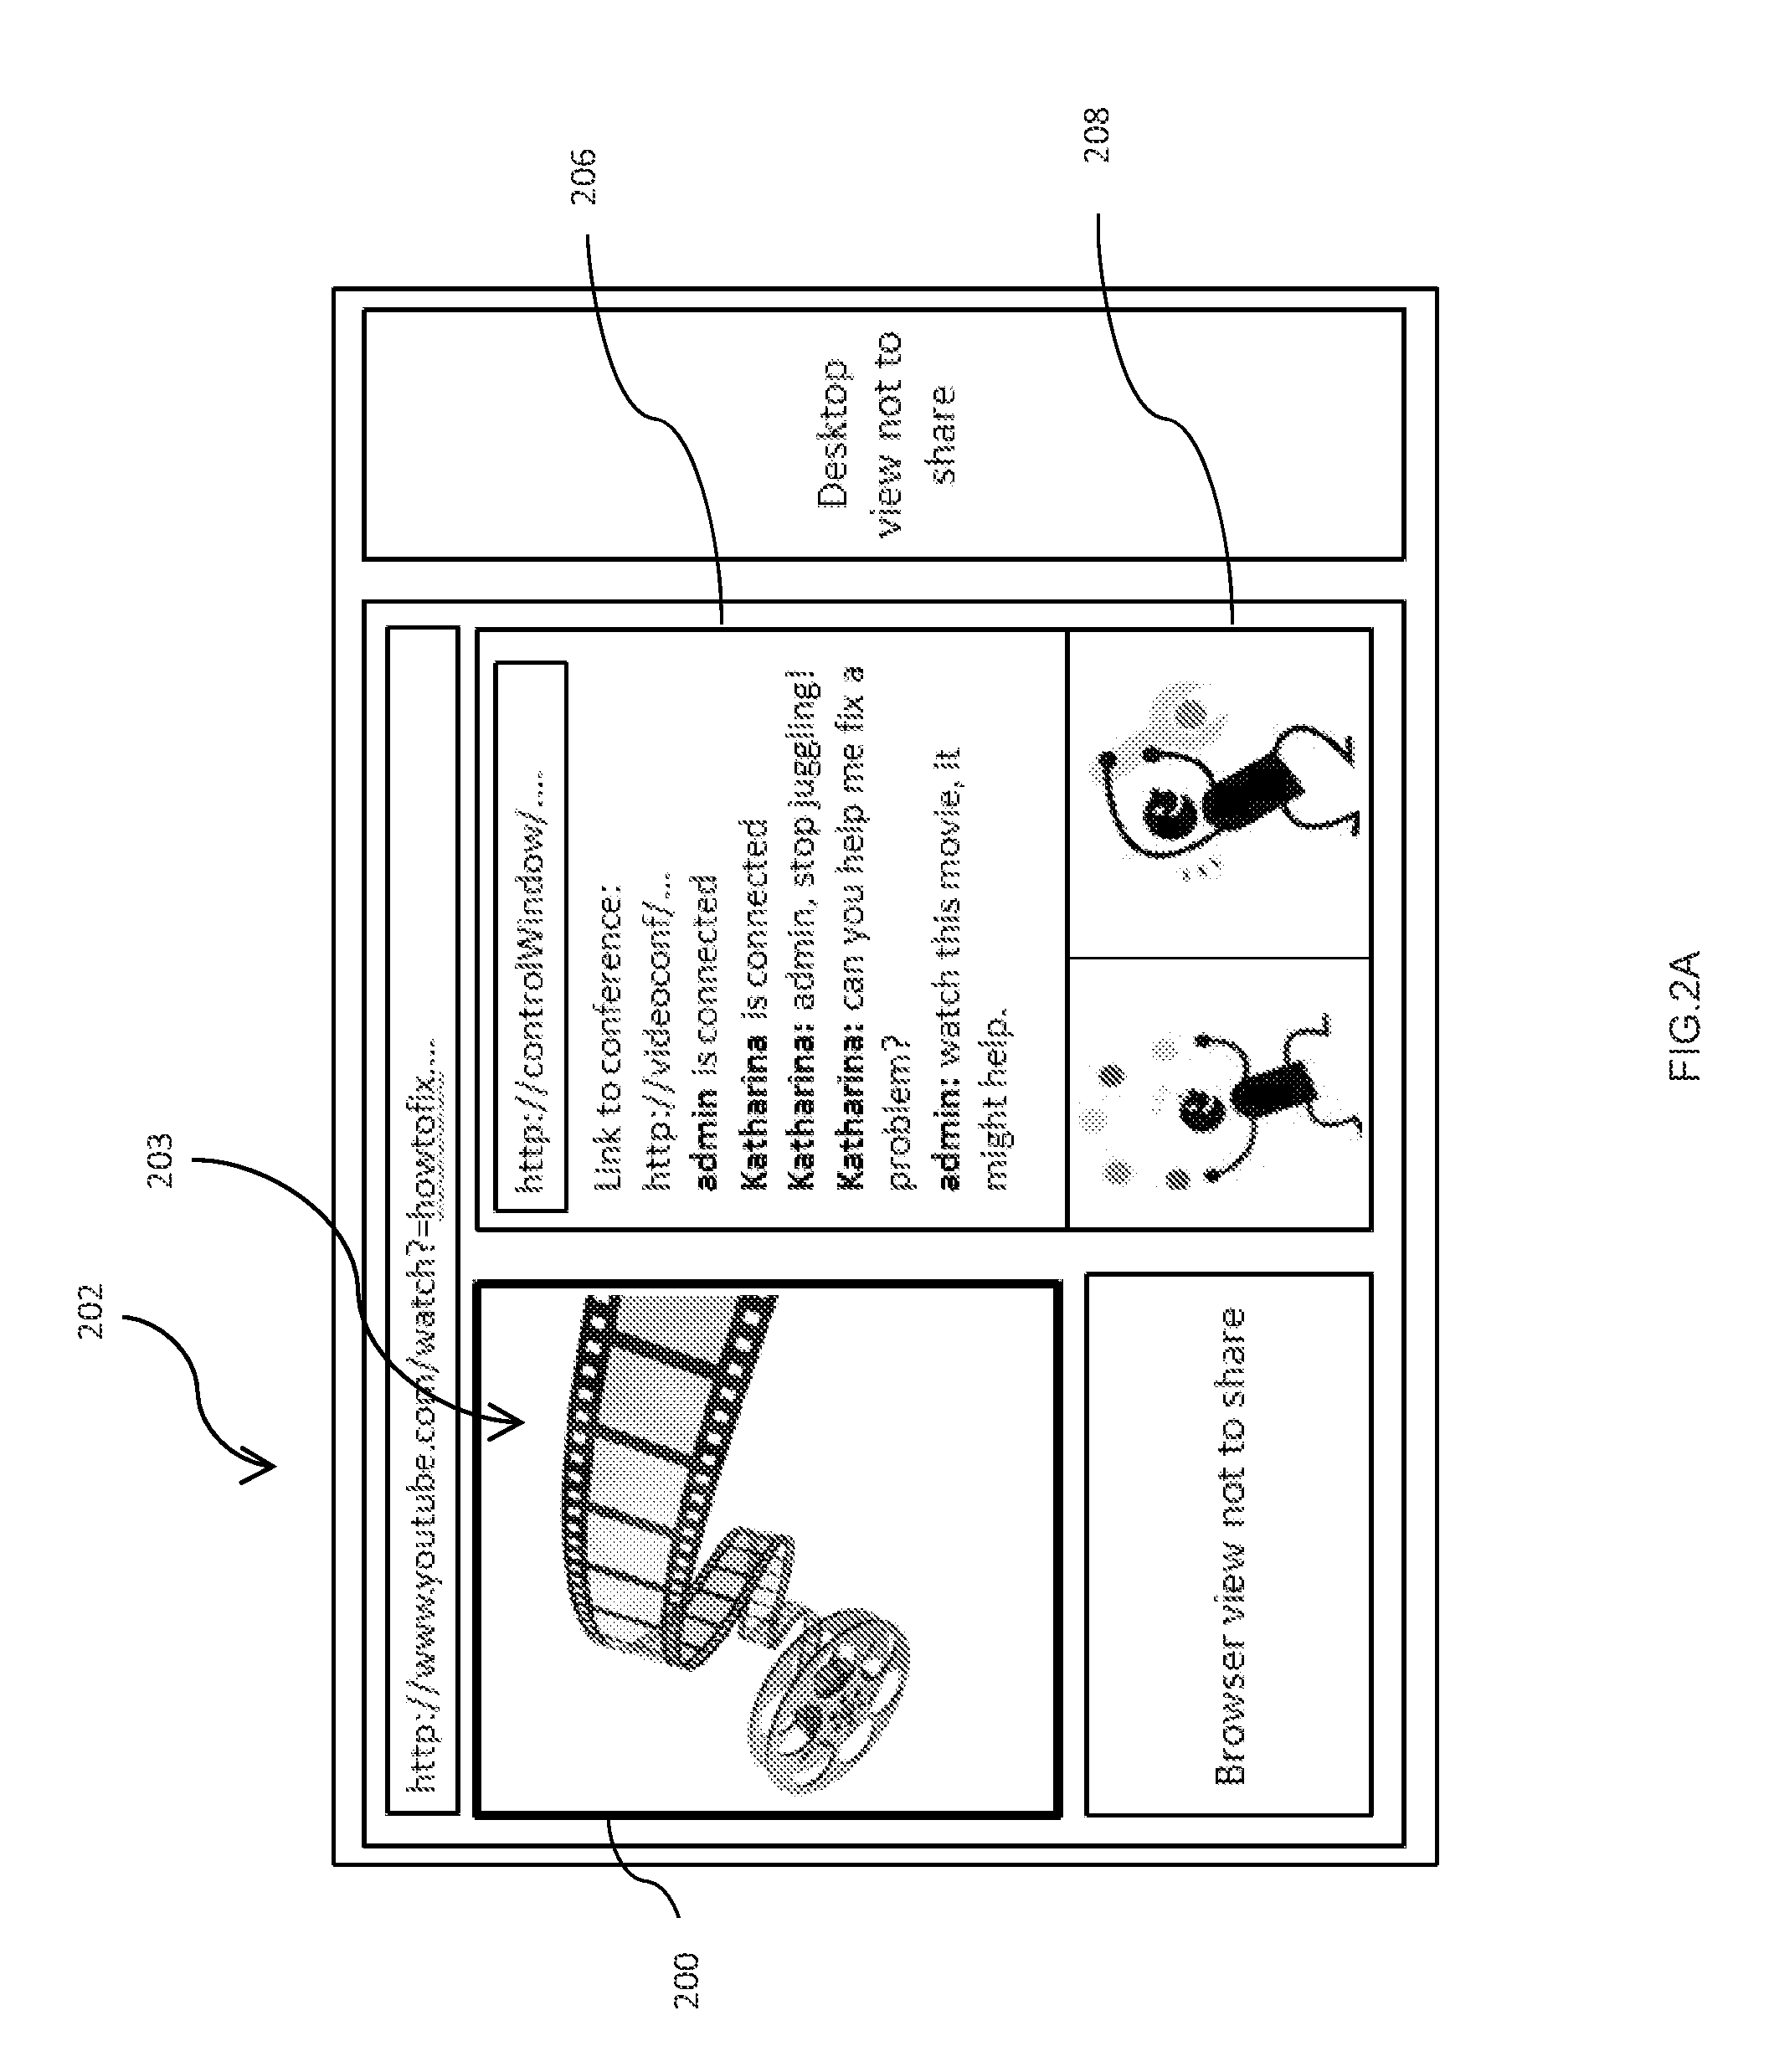 Screen sharing and video conferencing system and method